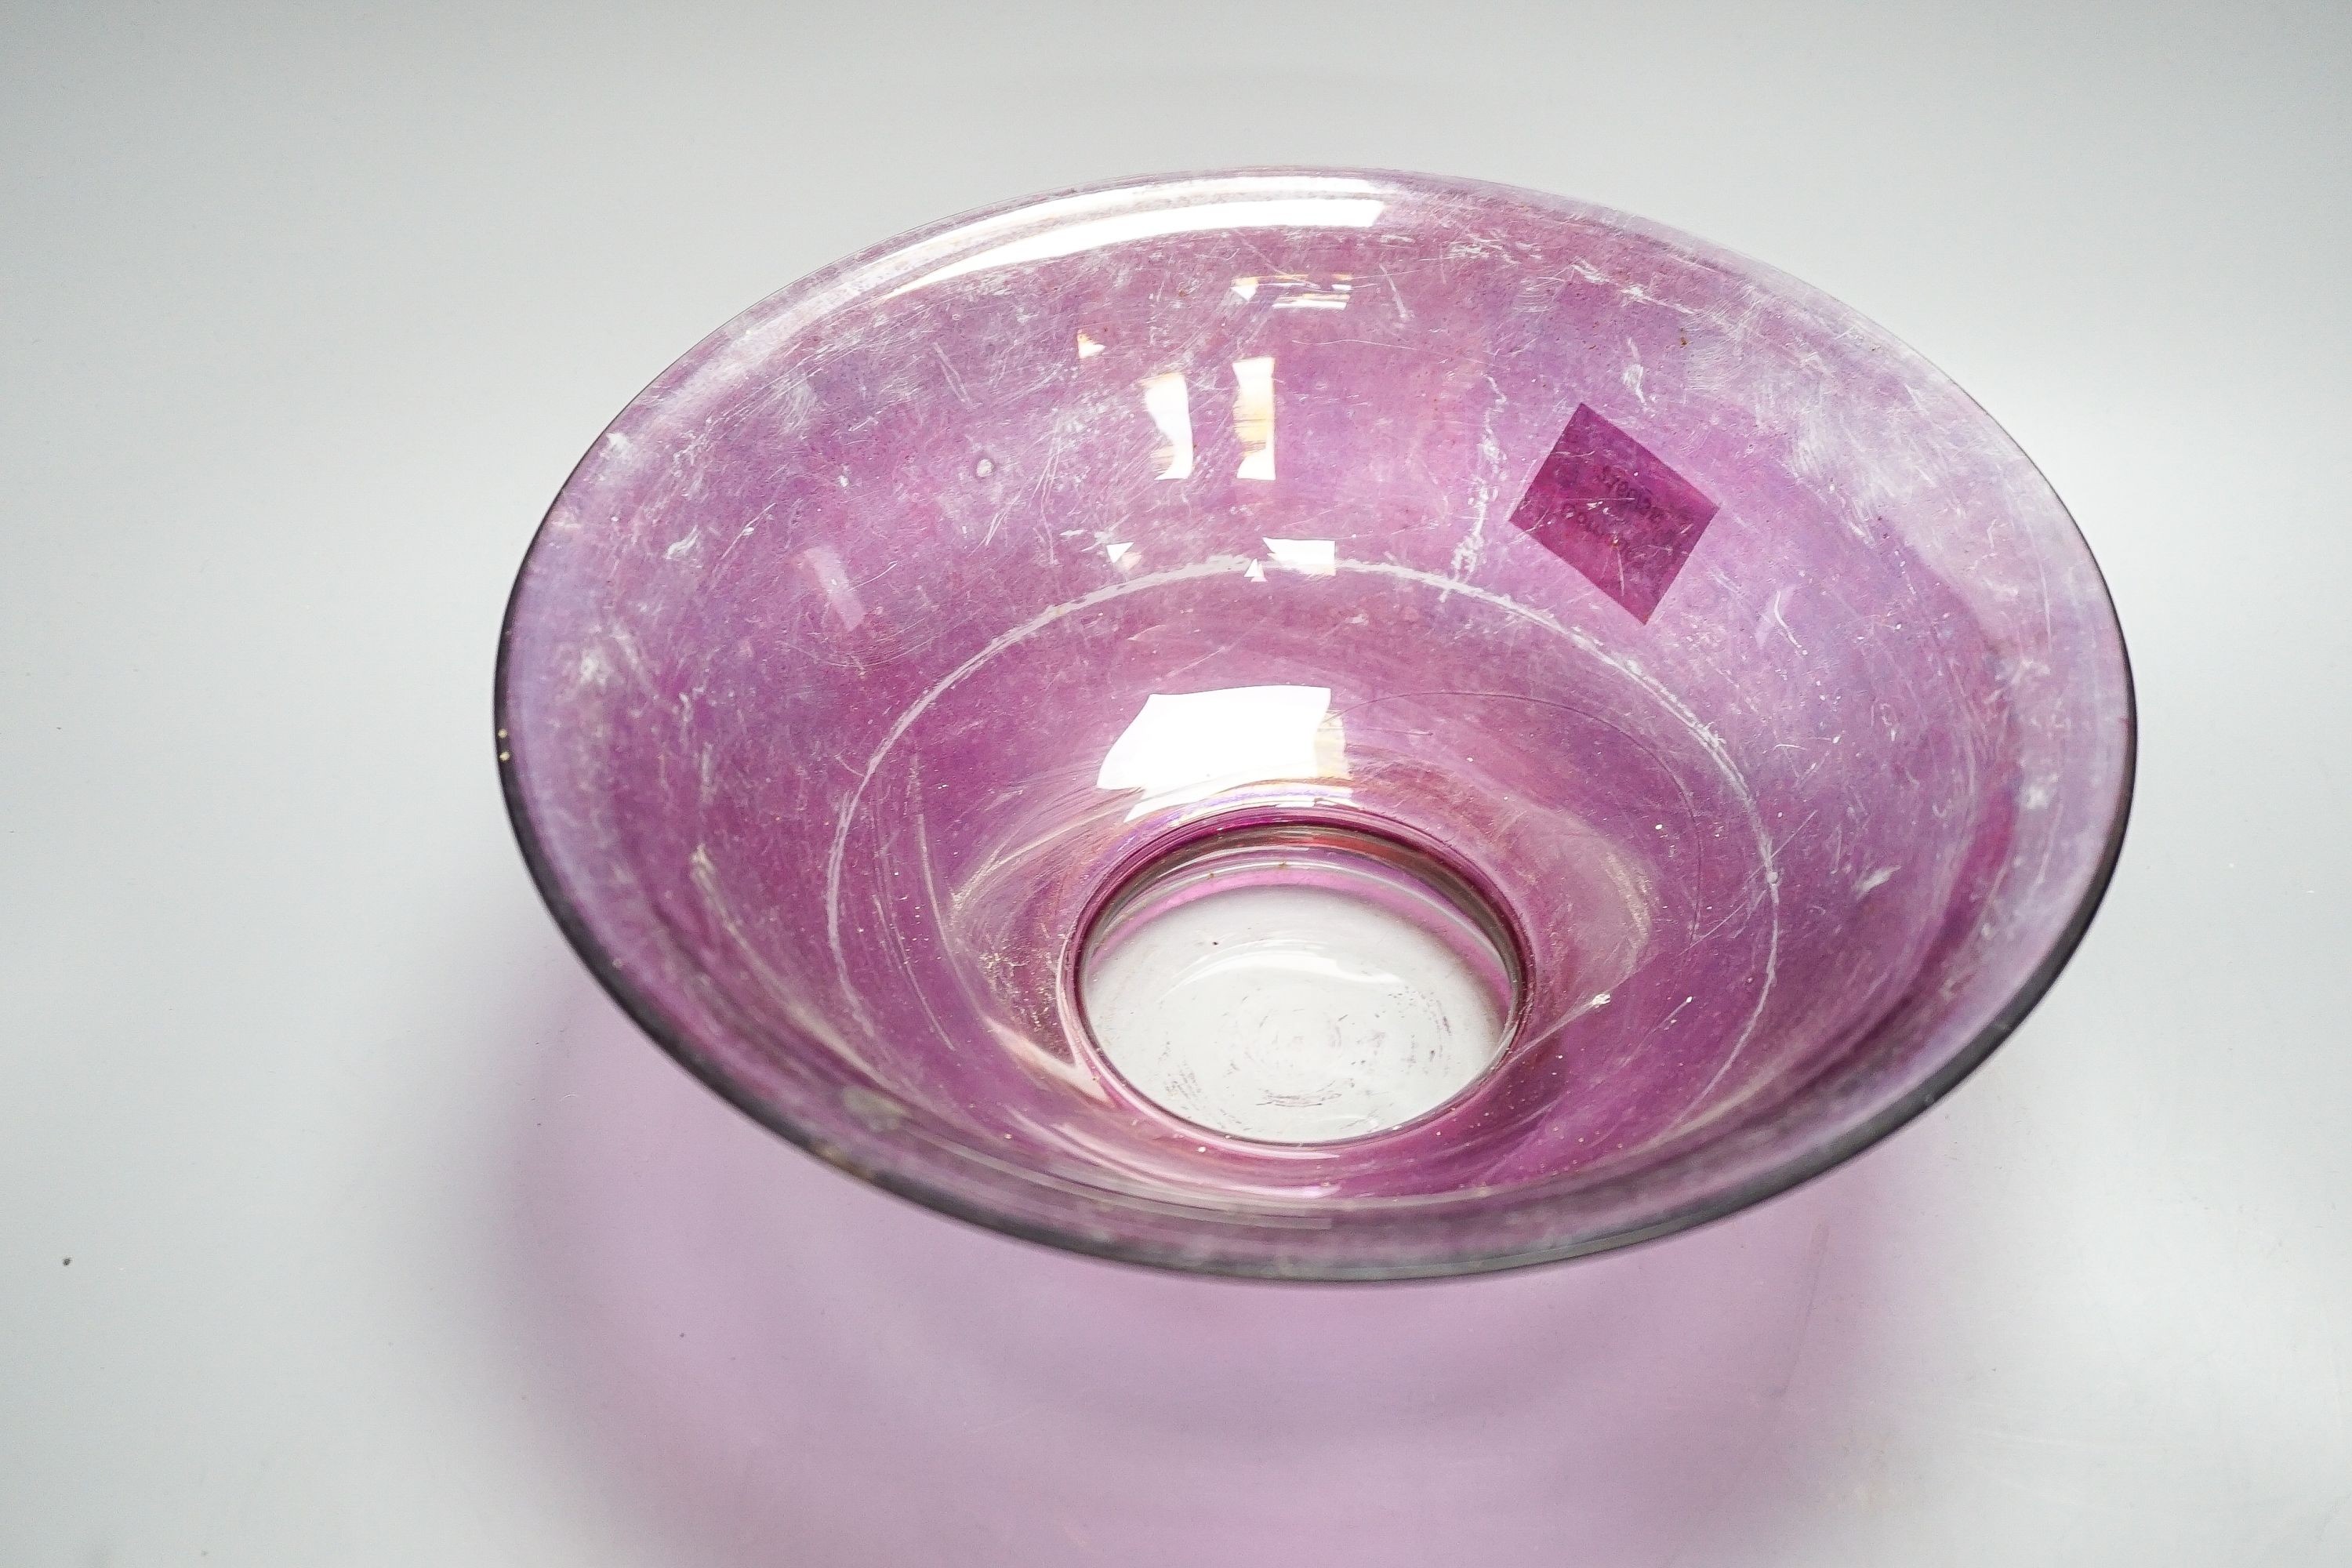 An amethyst flashed glass basin and jug.